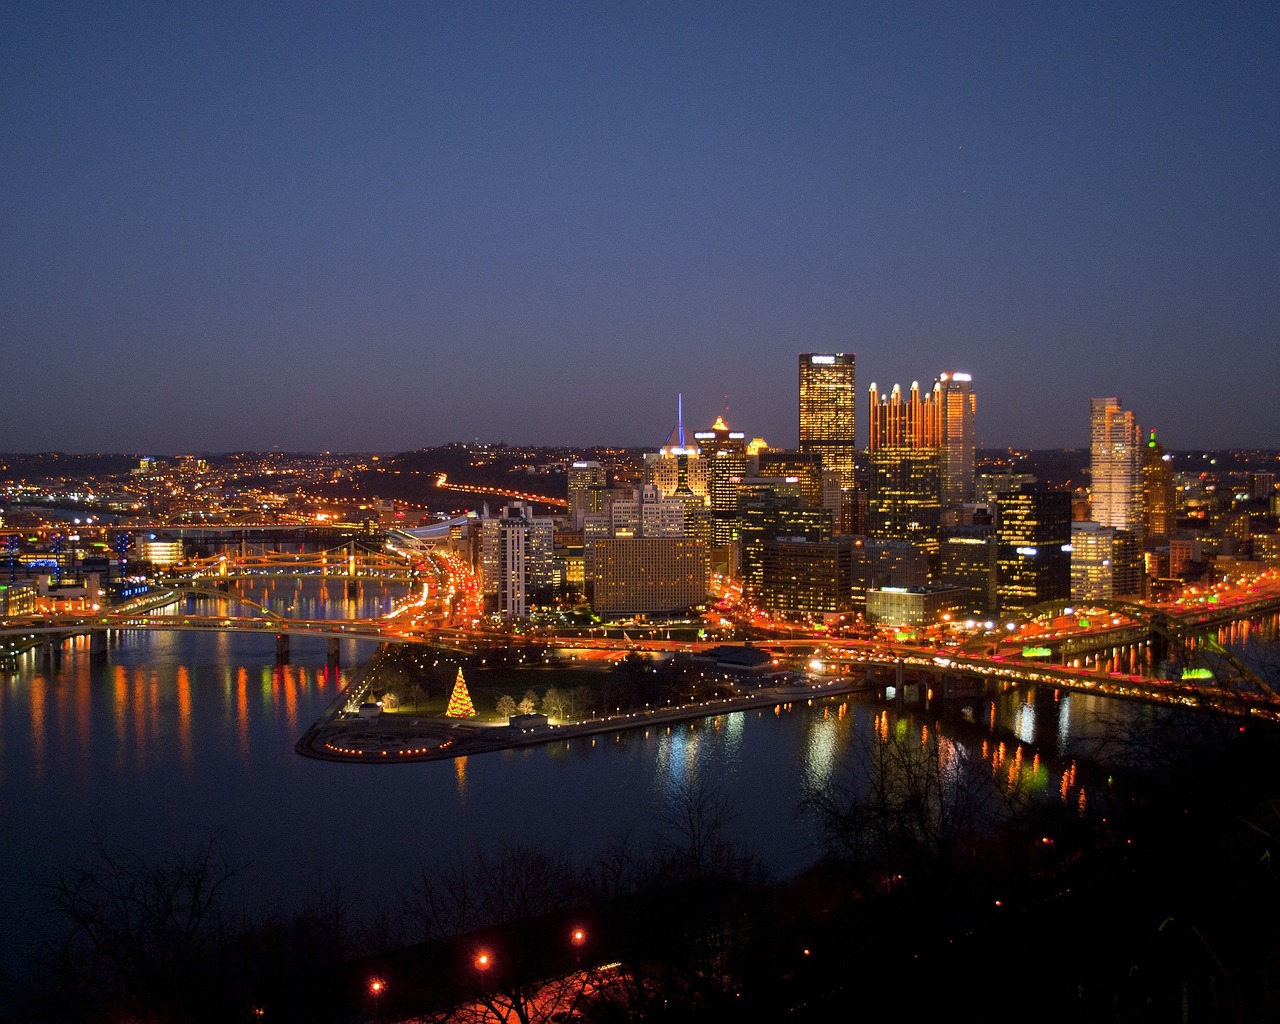 Image of downtown Pittsburgh where we provide answering services in Pennsylvania